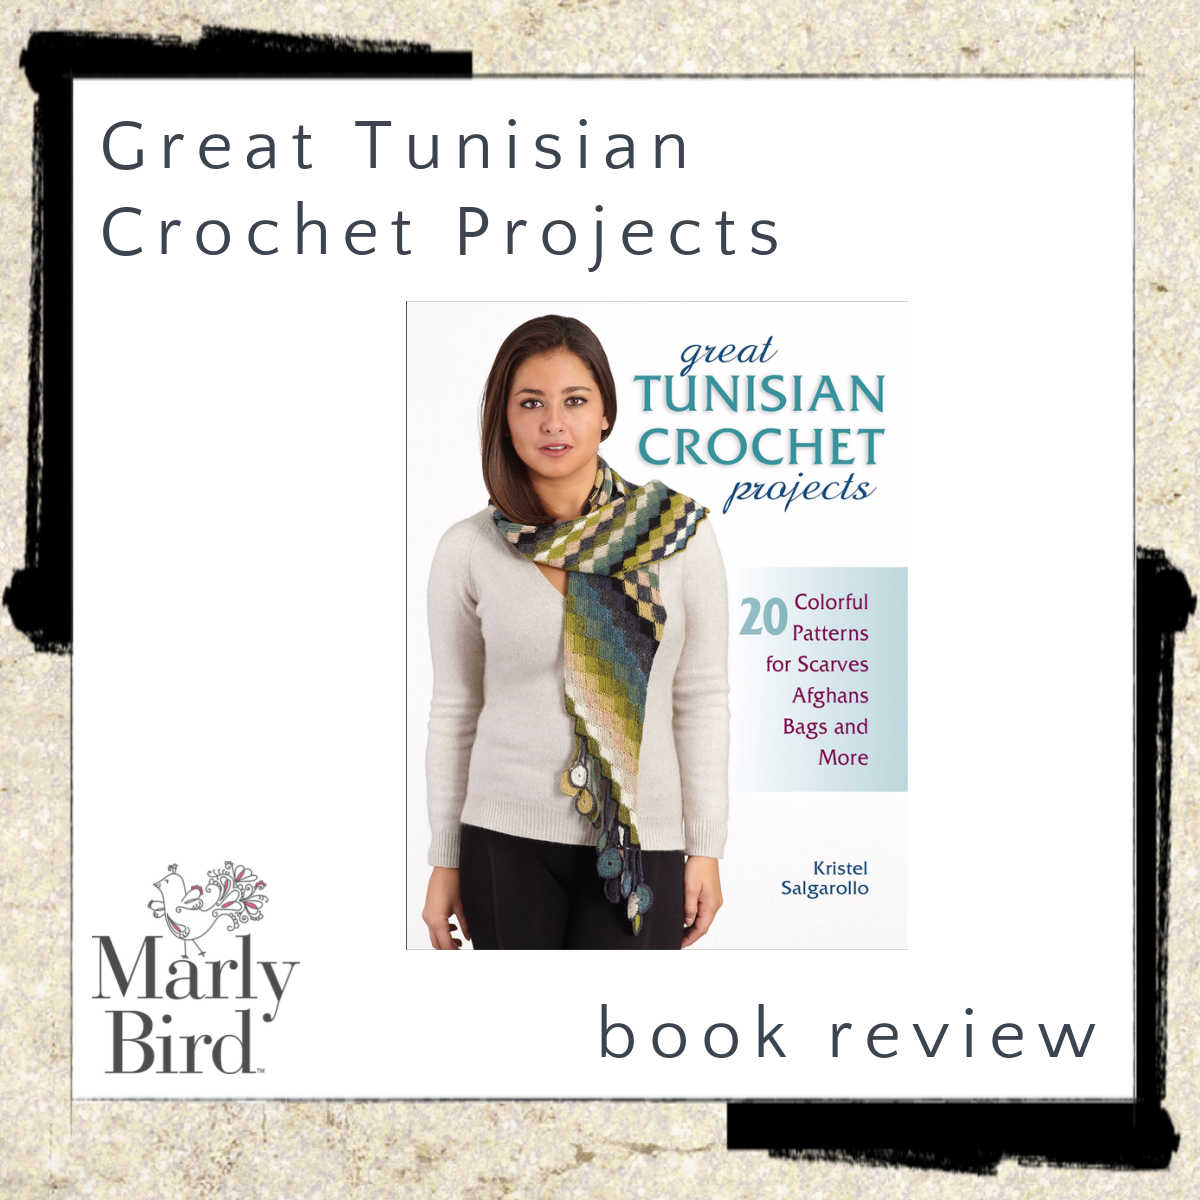 great Tunisian crochet projects book review